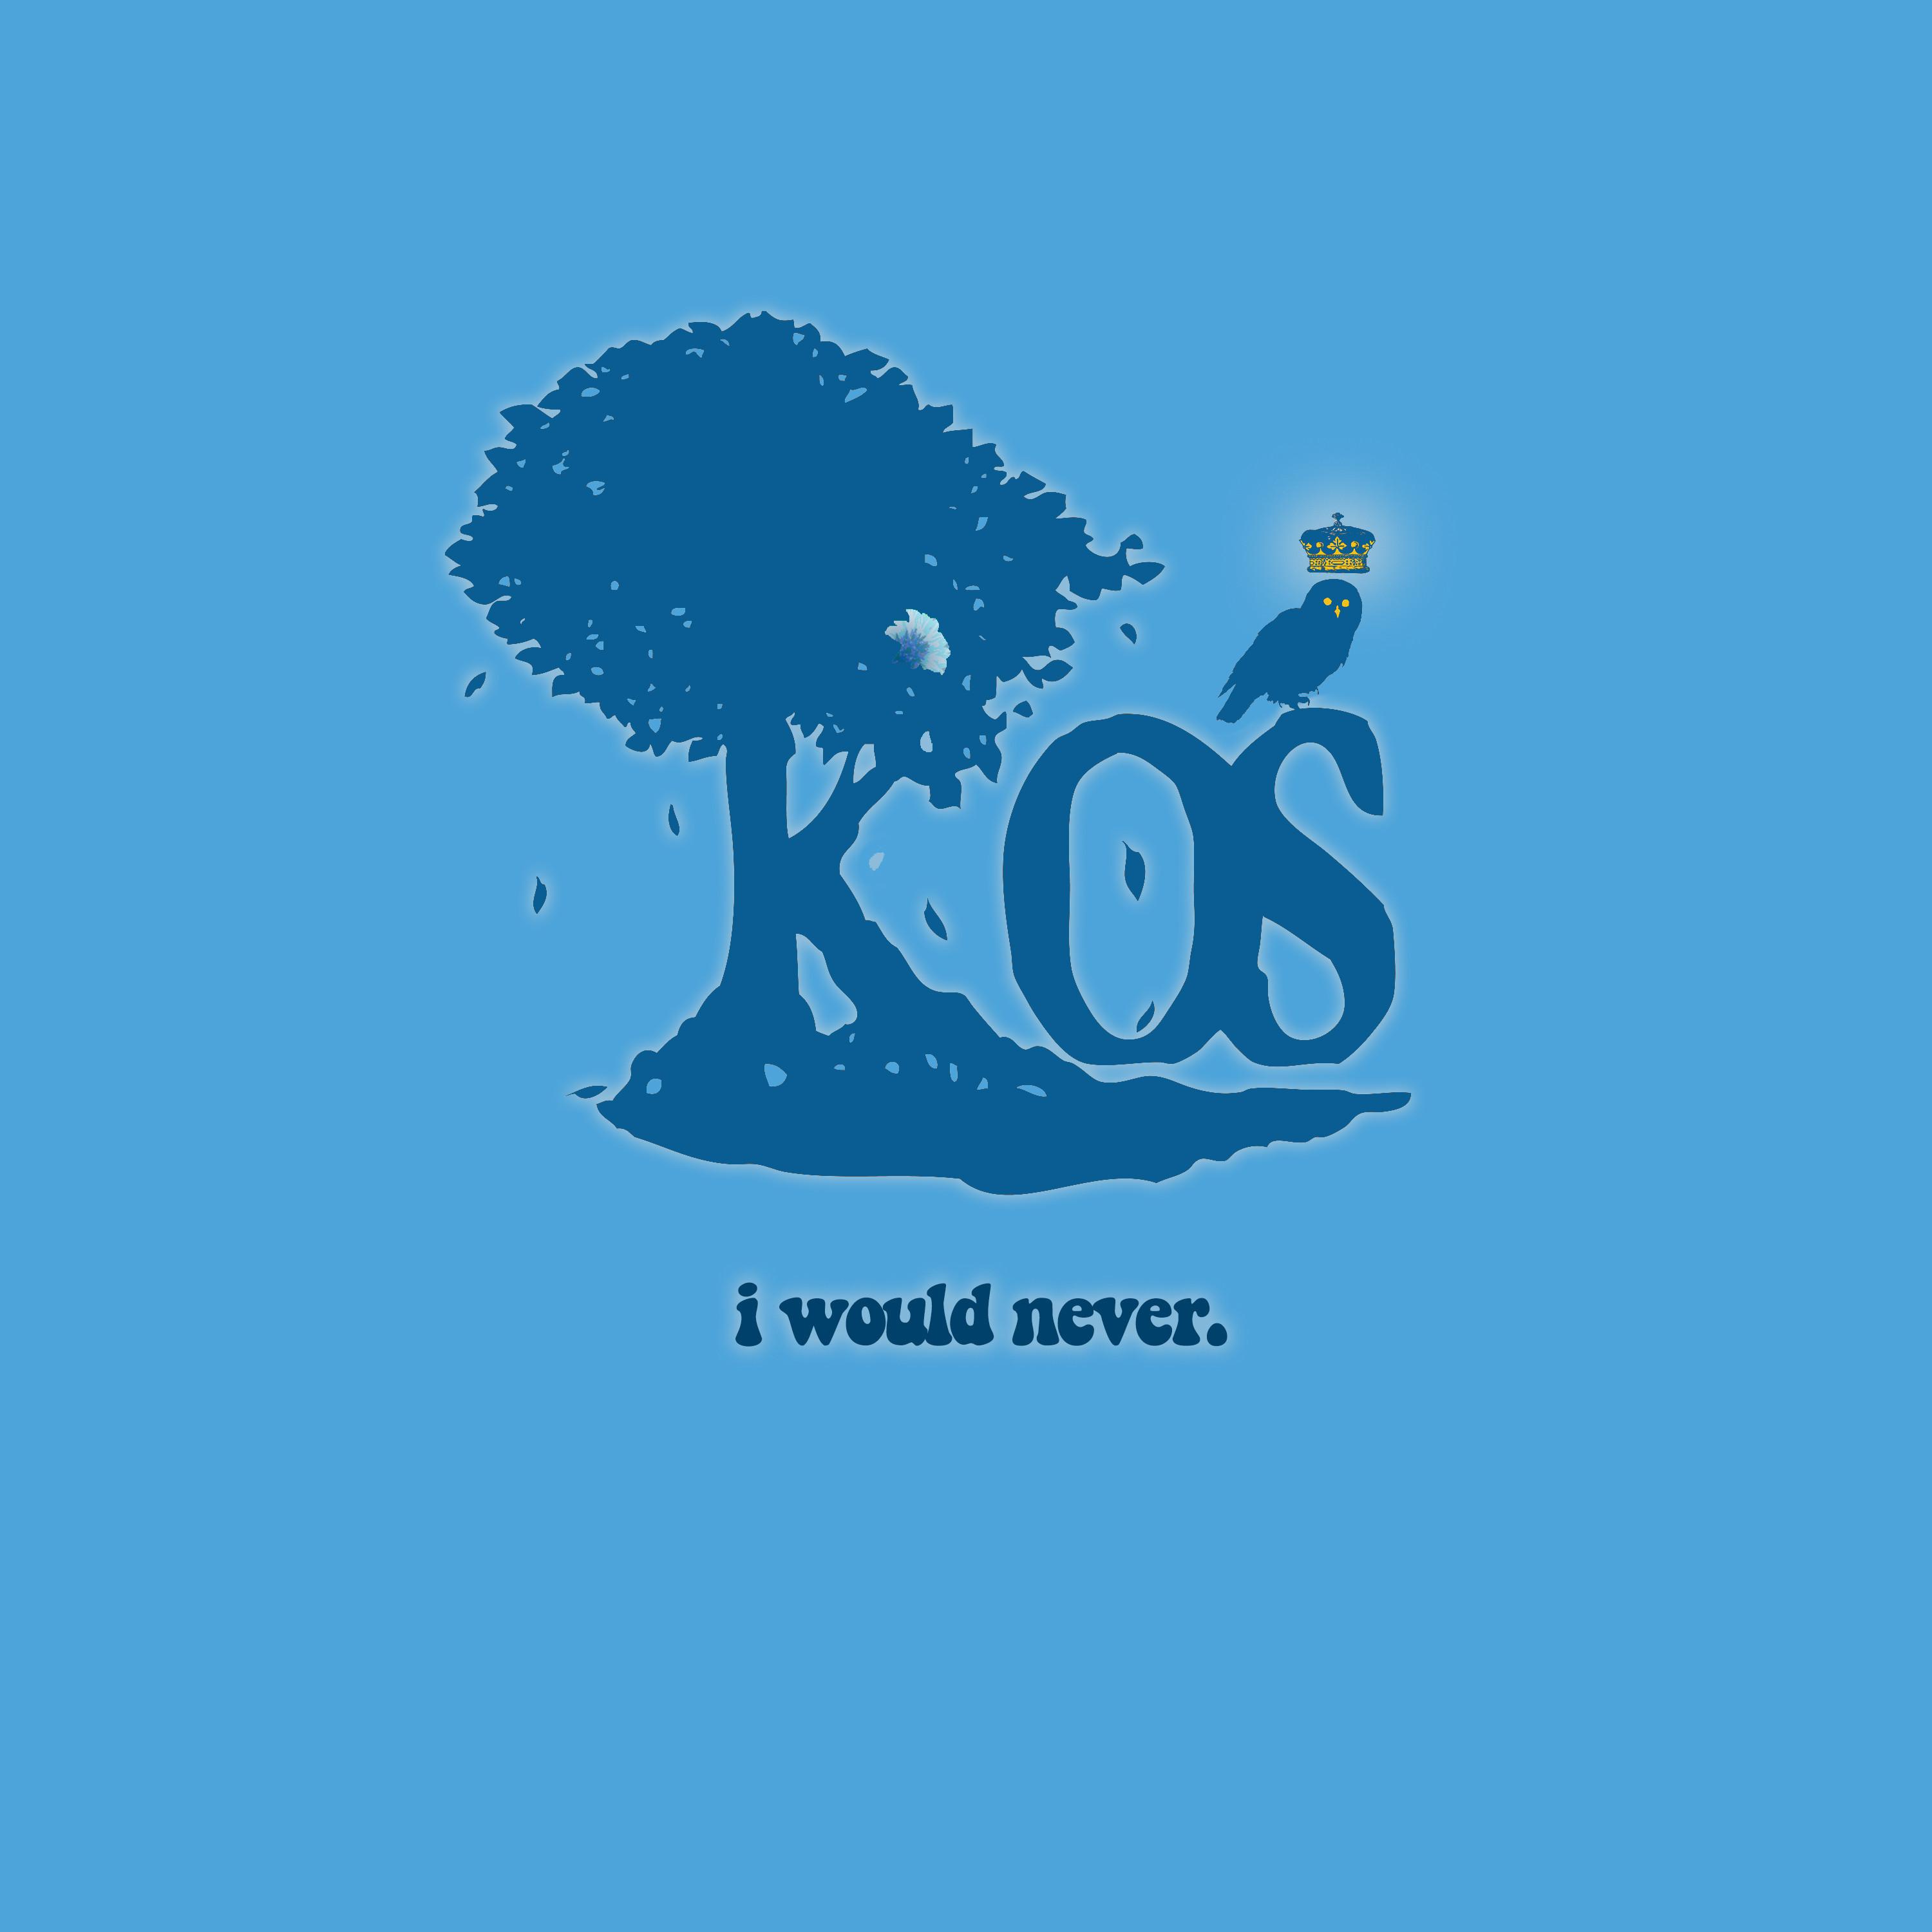 k-os - i would never.